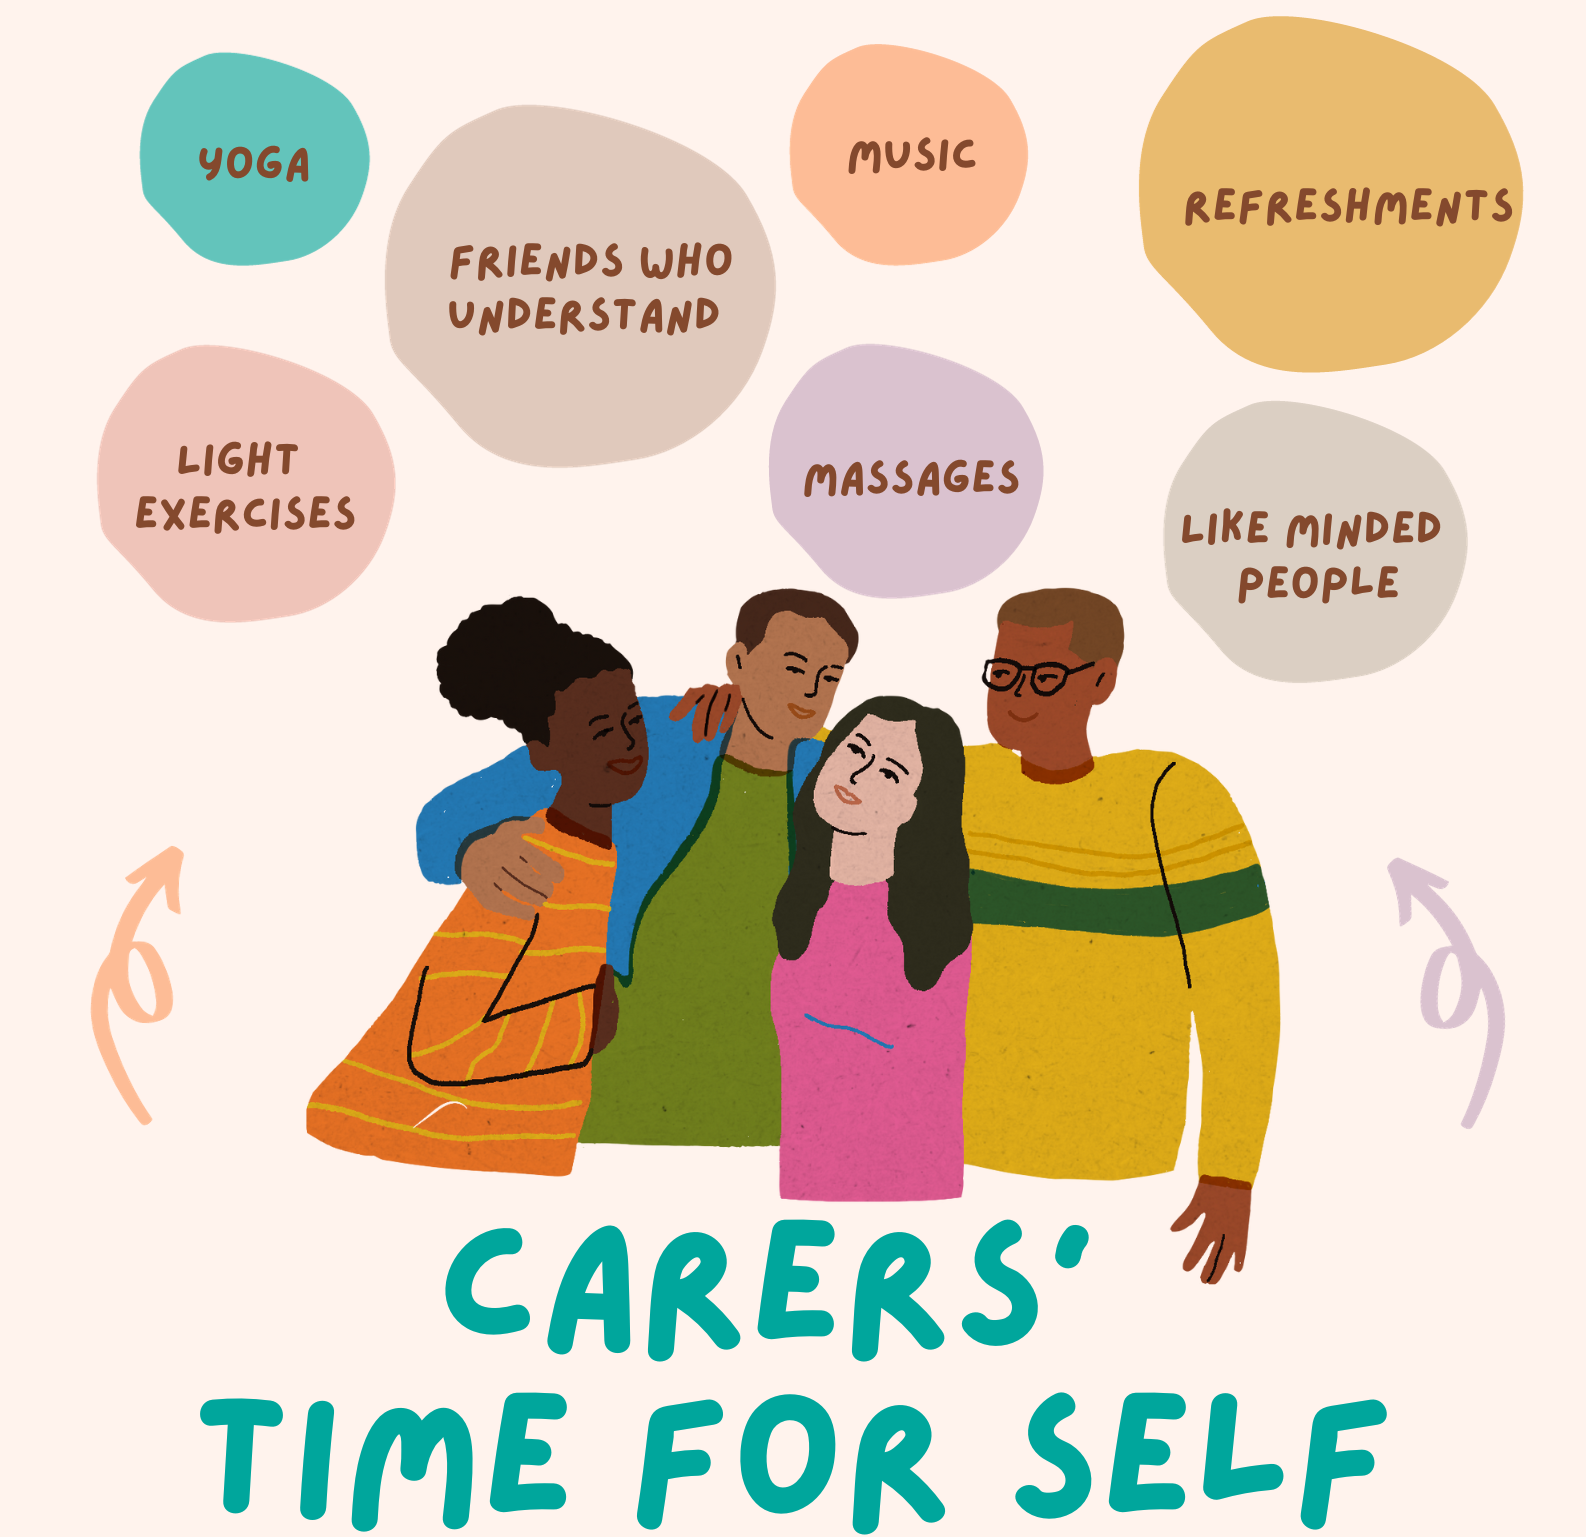 Carers' time for self